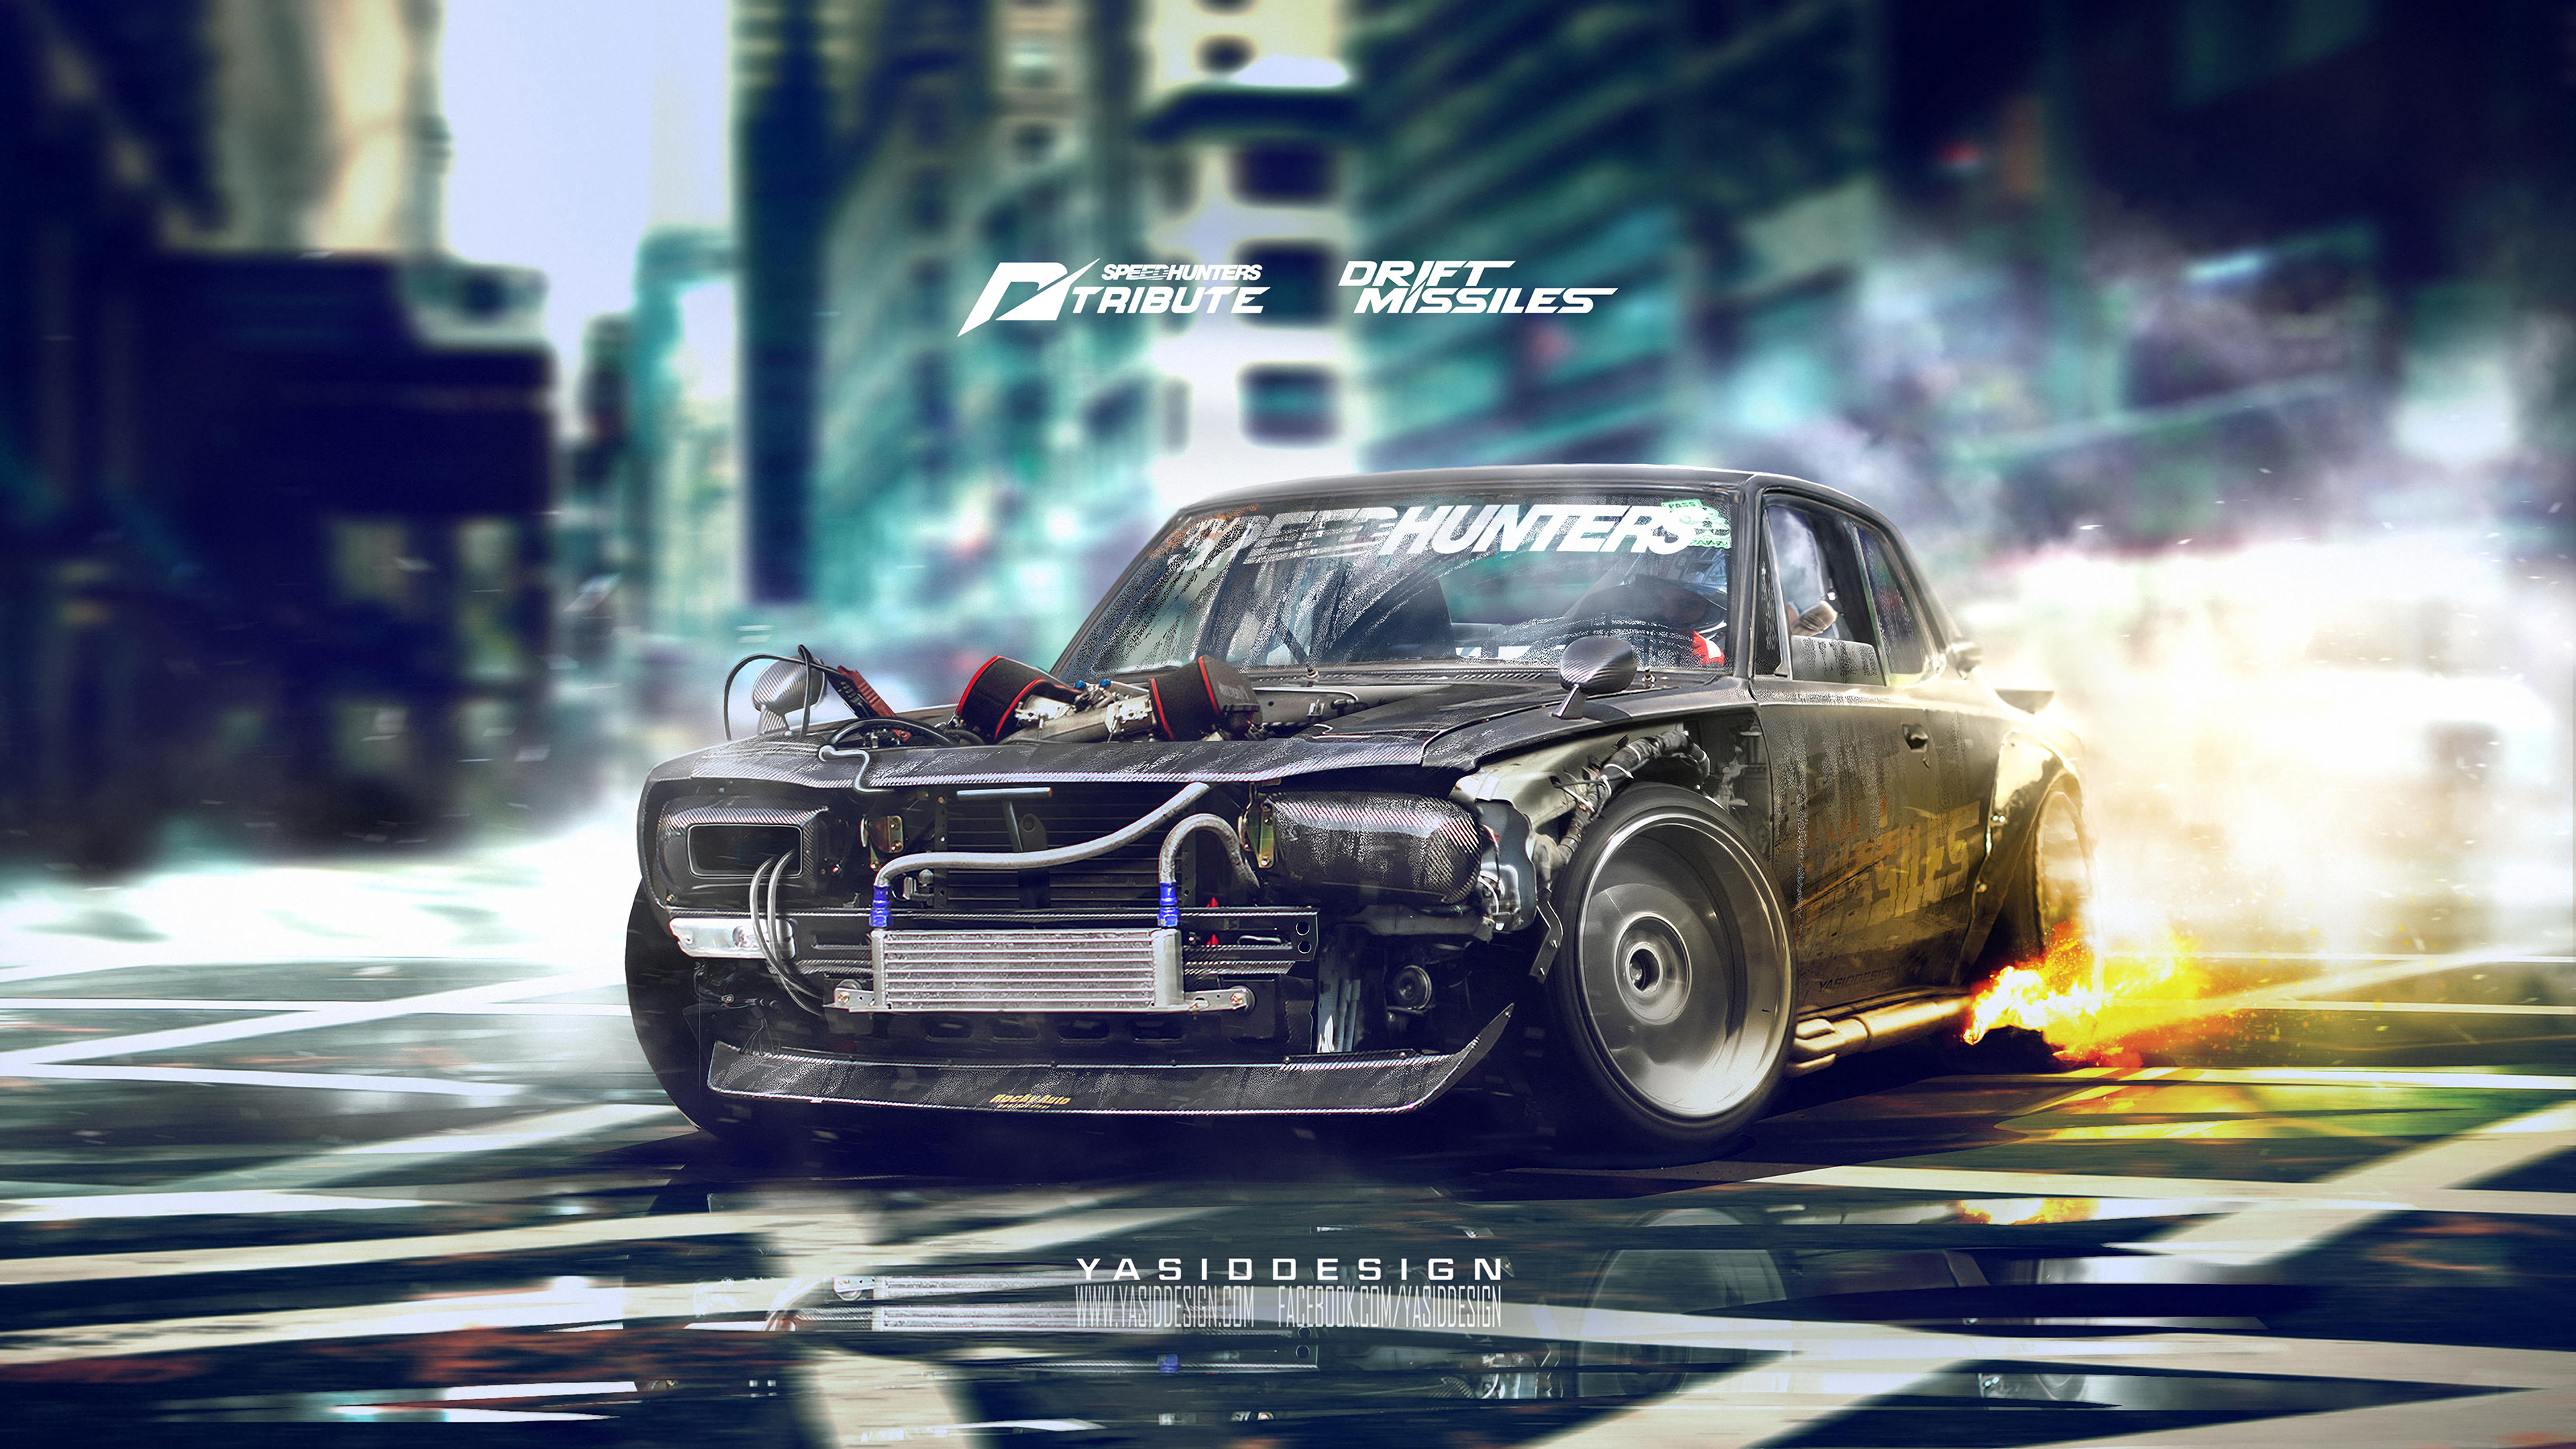 Screensaver with nissan skyline in drifting